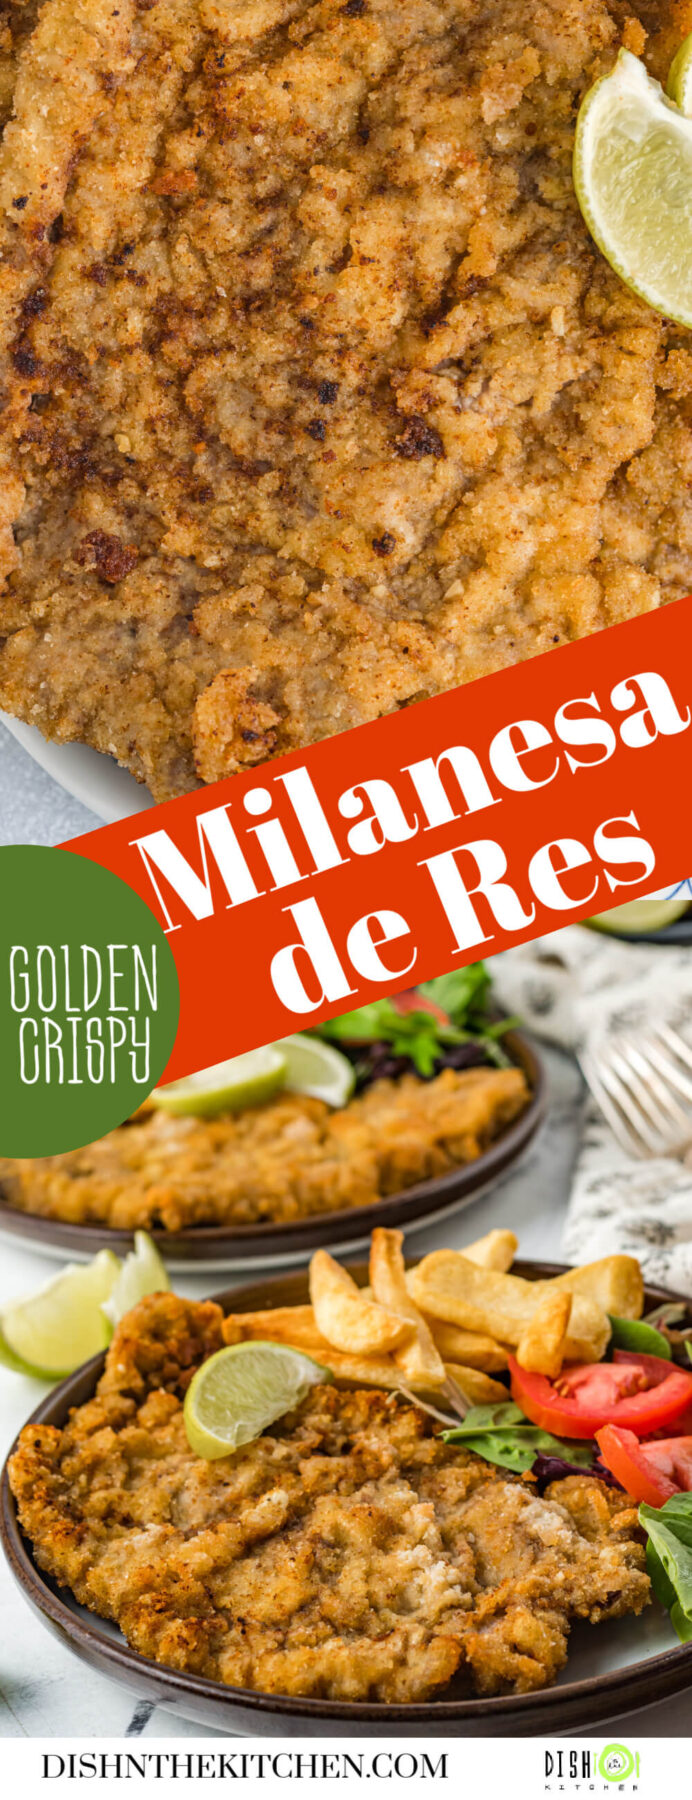 Pinterest image featuring golden fried Milanesa de Res and how to serve it.